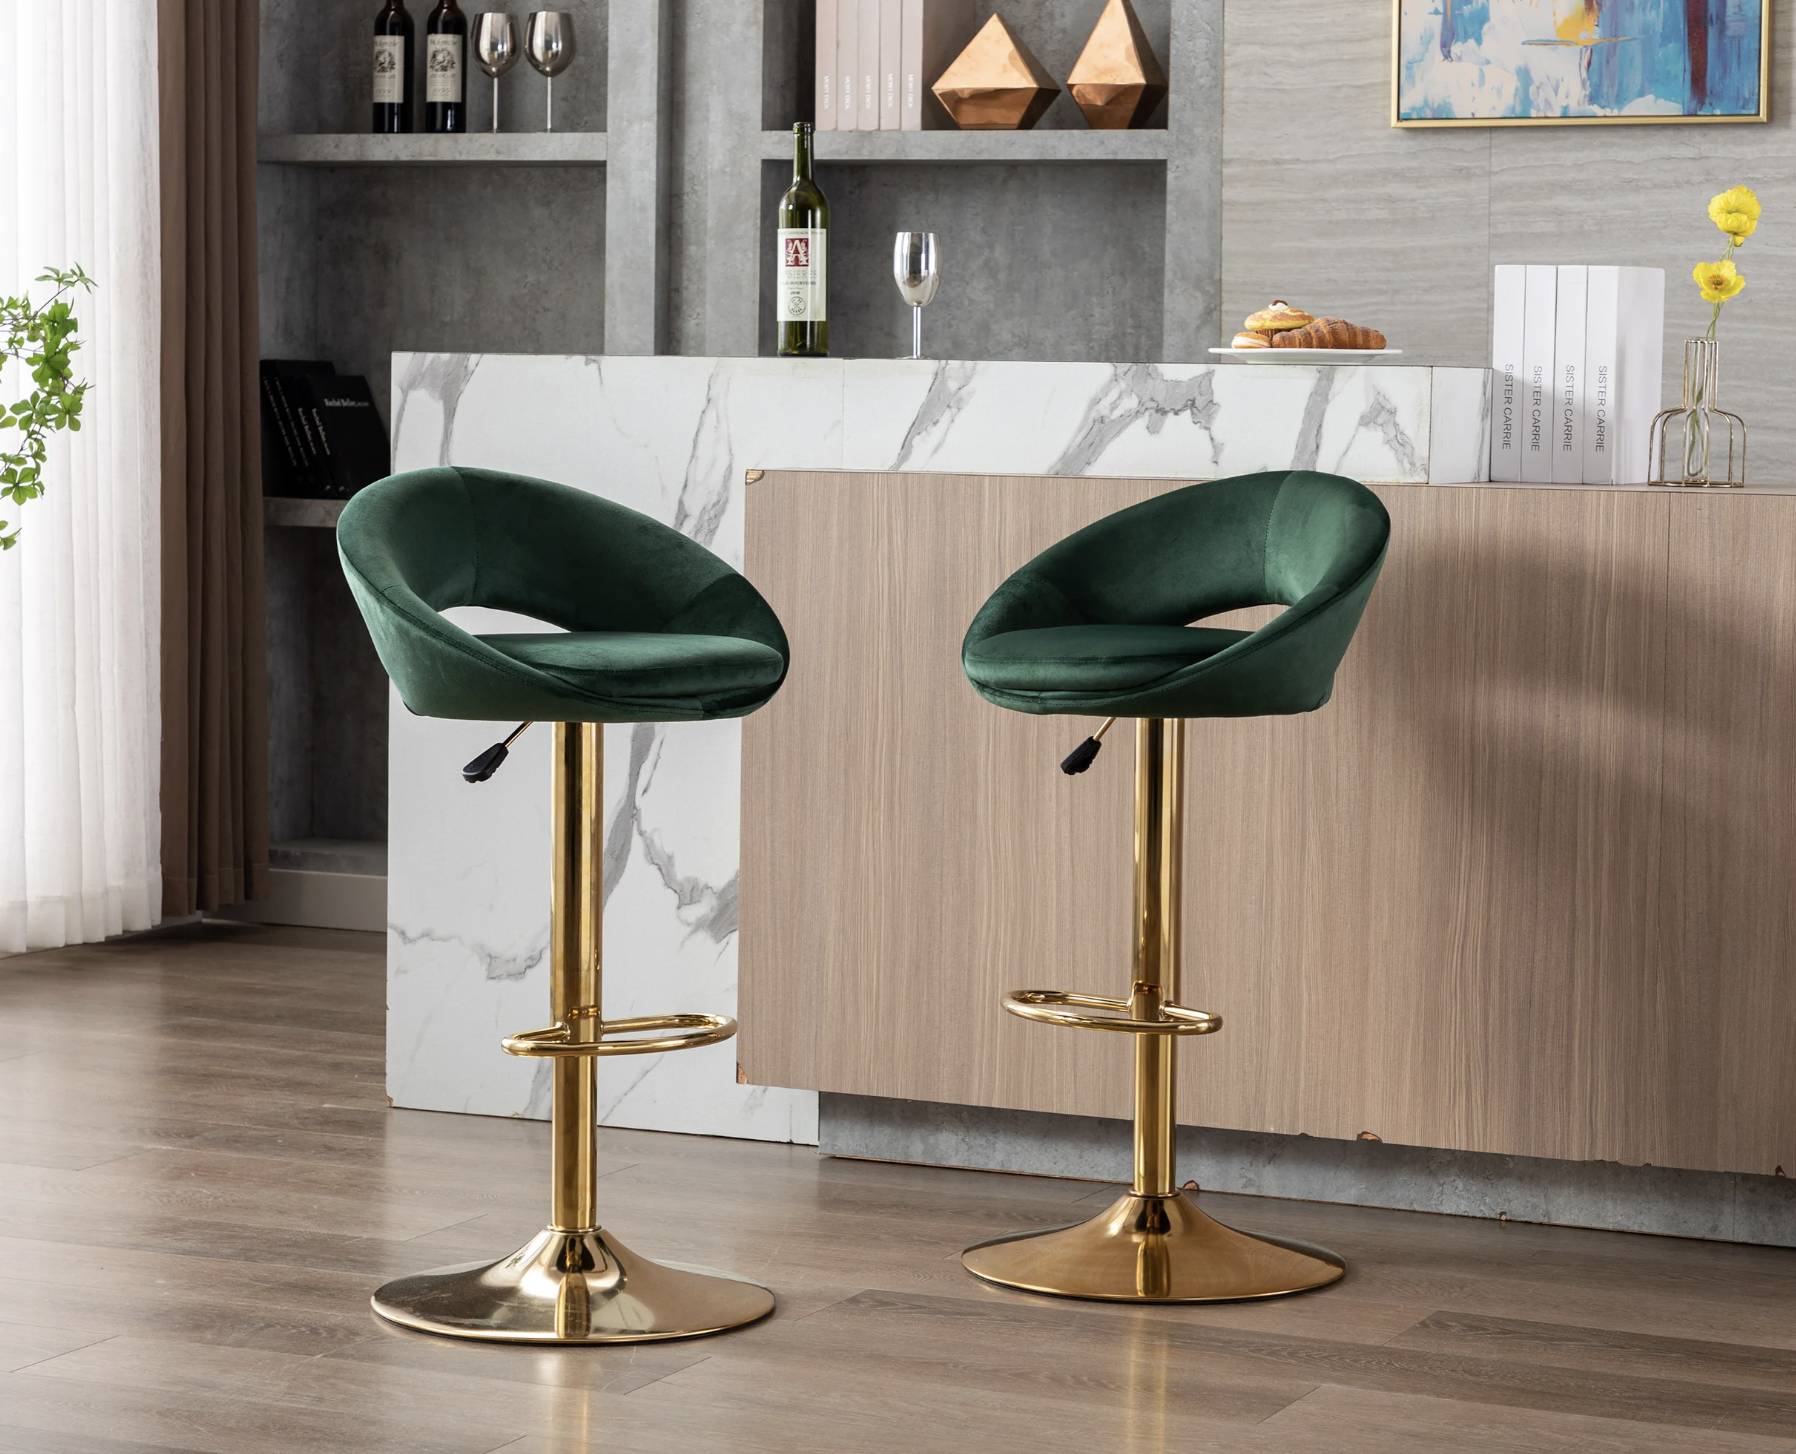 Two modern green velvet bar stools with gold bases in a kitchen